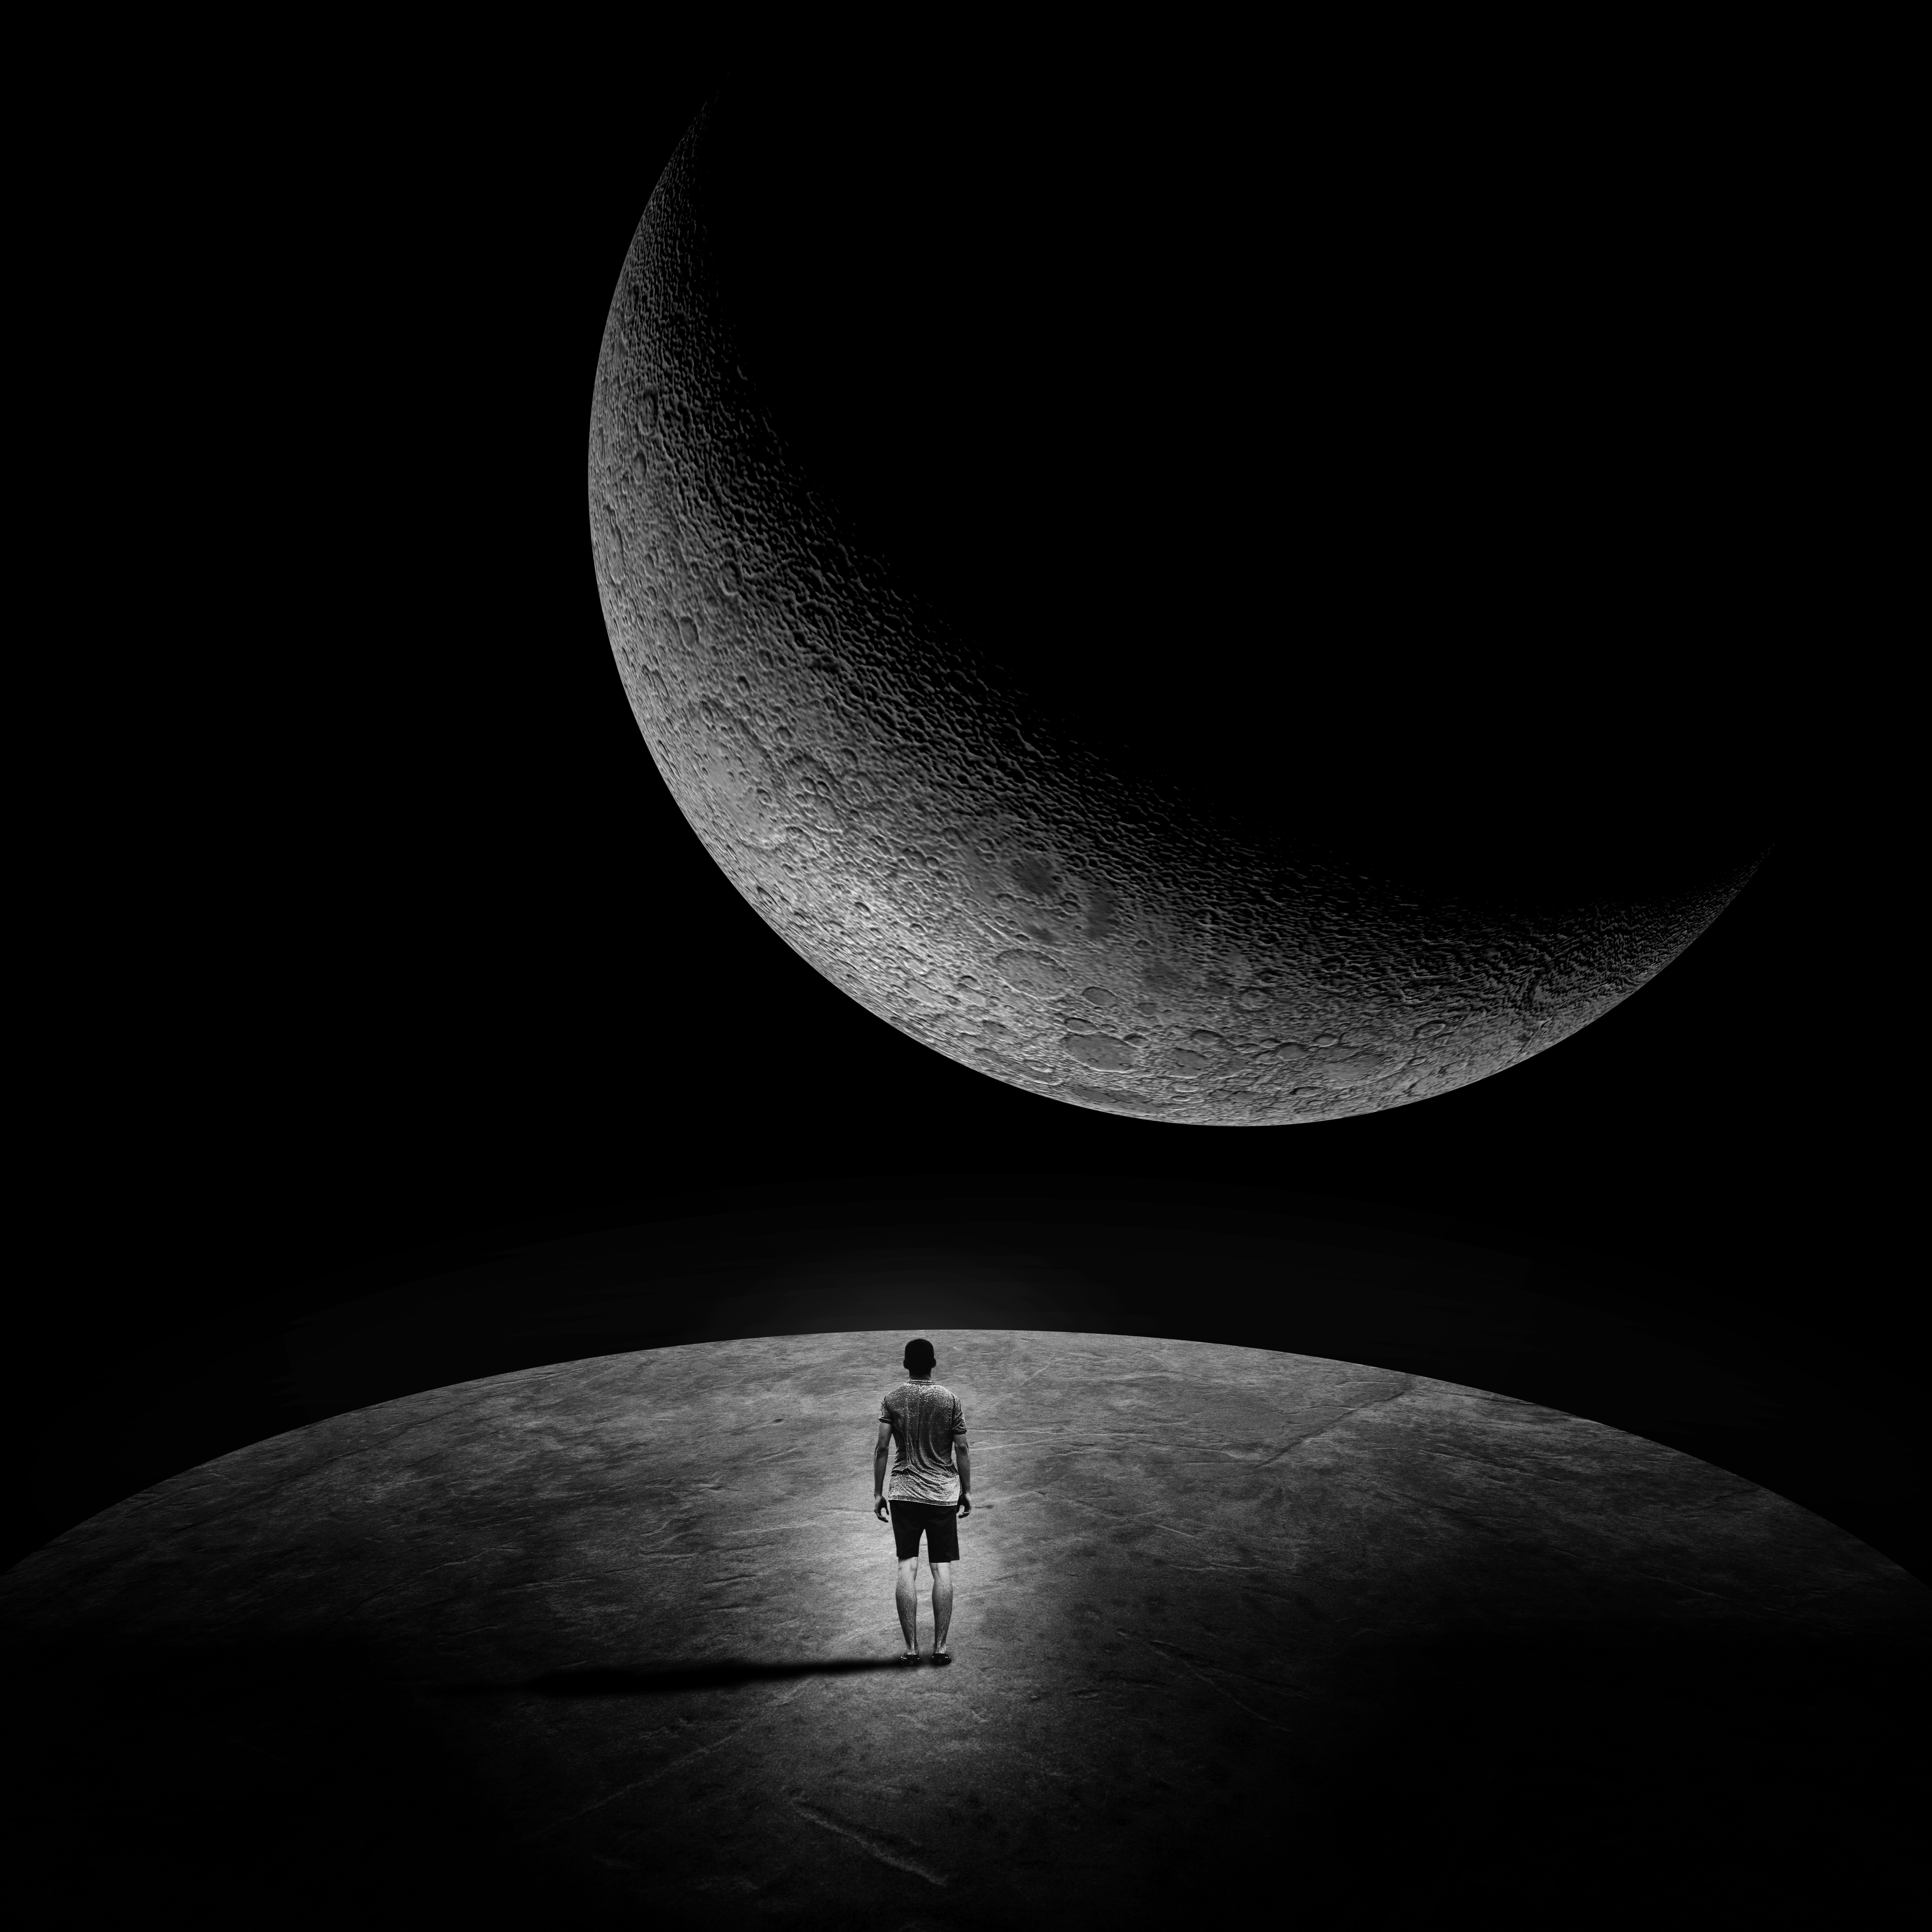 space, black and white, loneliness, human, moon, cosmic, black, dark, extraterrestrial, person